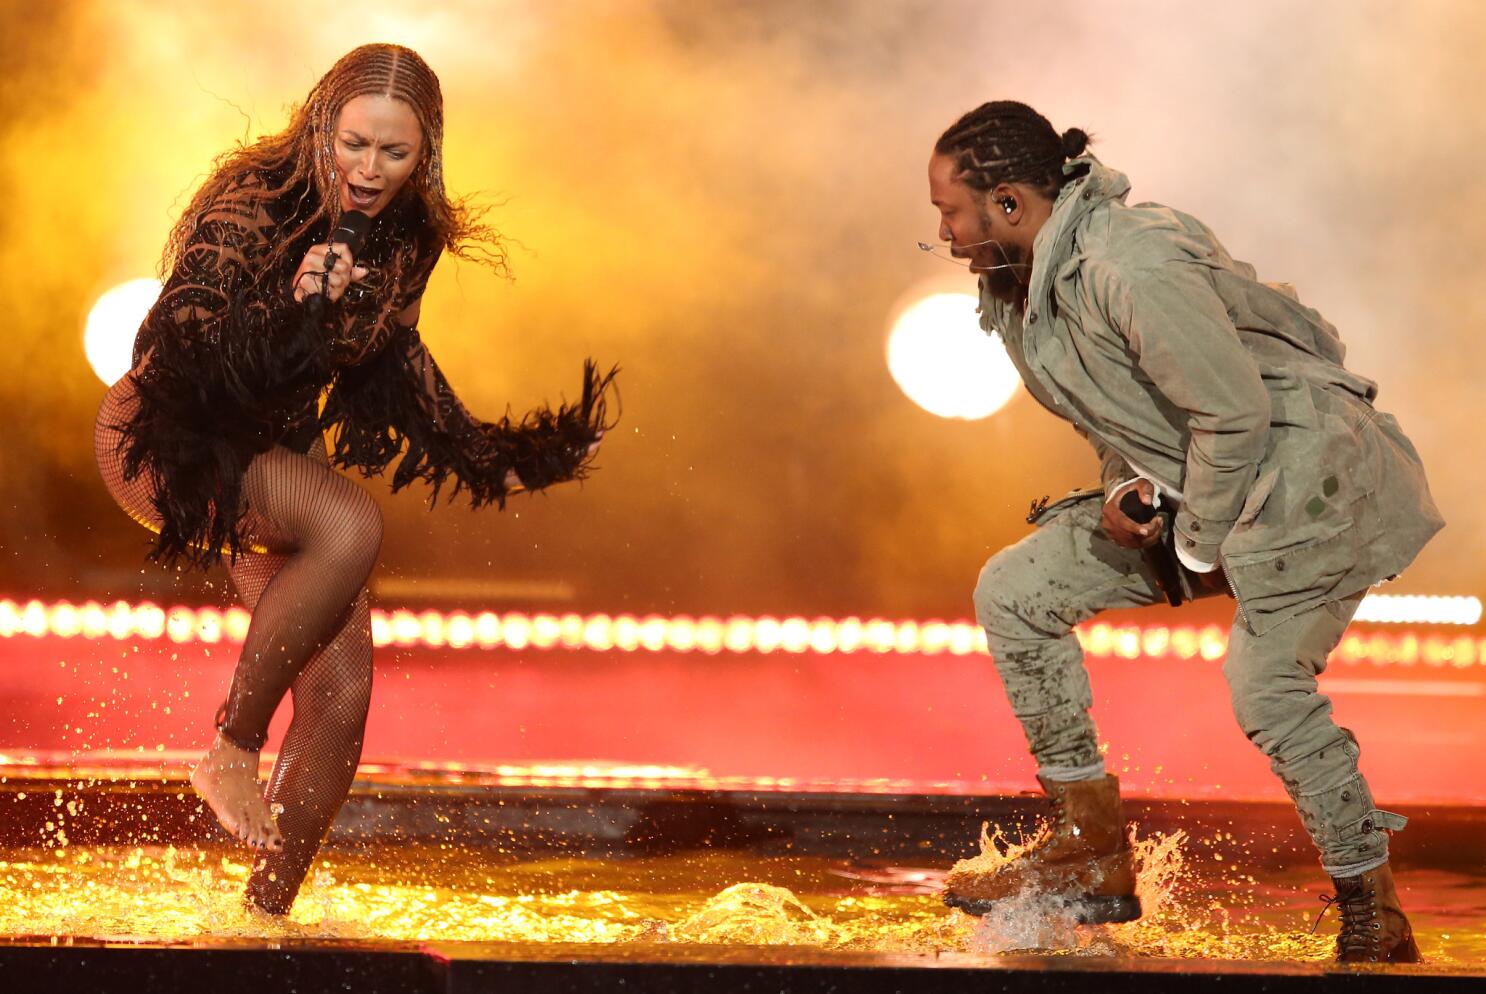 Beyoncé and Kendrick Lamar open the BET Awards with a rebellious